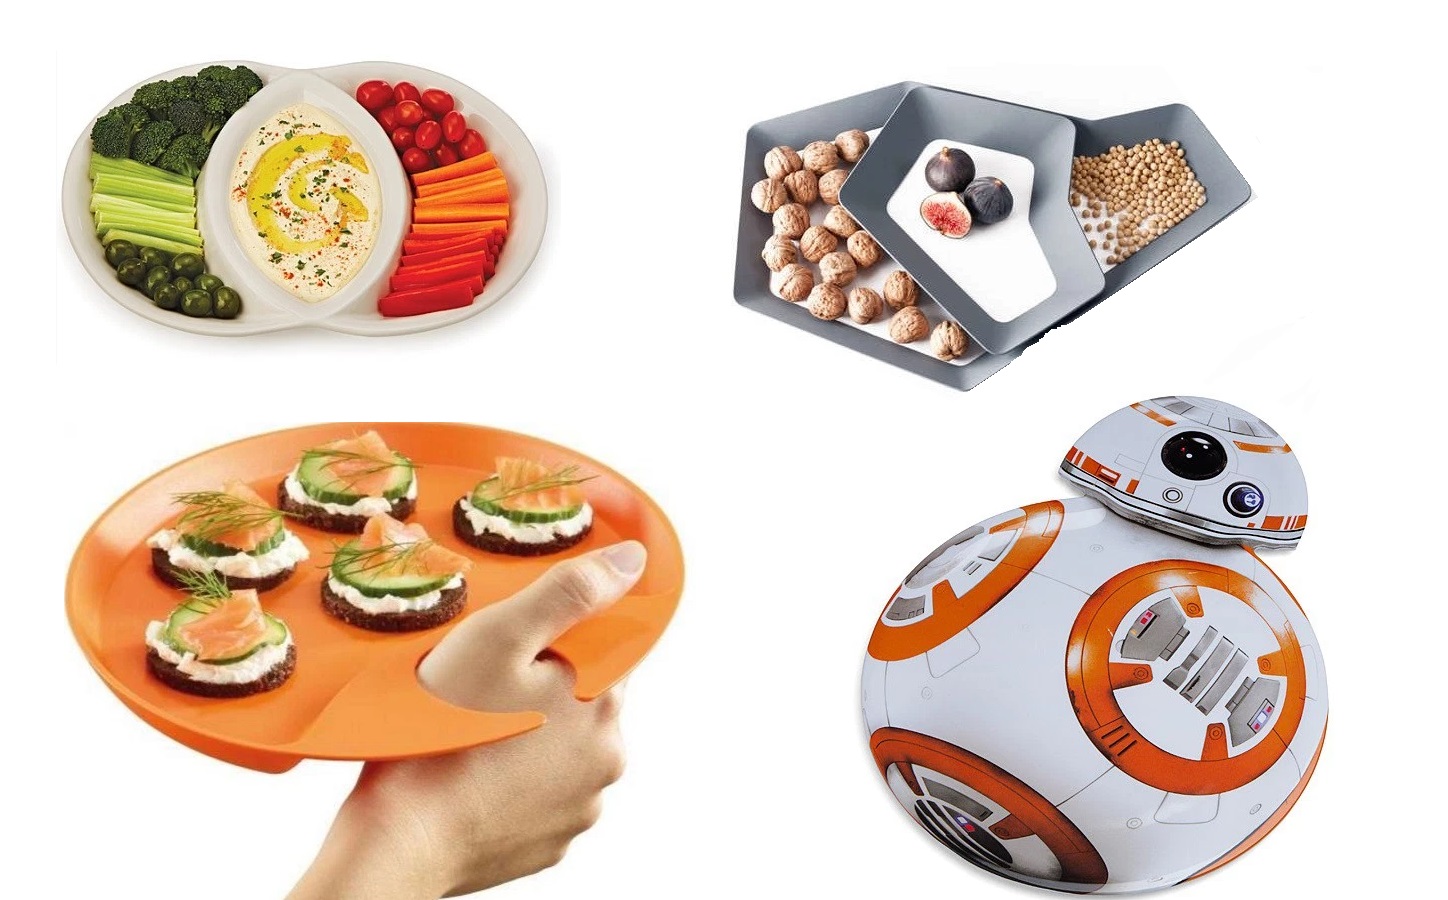 Top 10 Amazing, Nerdy and Unusual Serving Platters